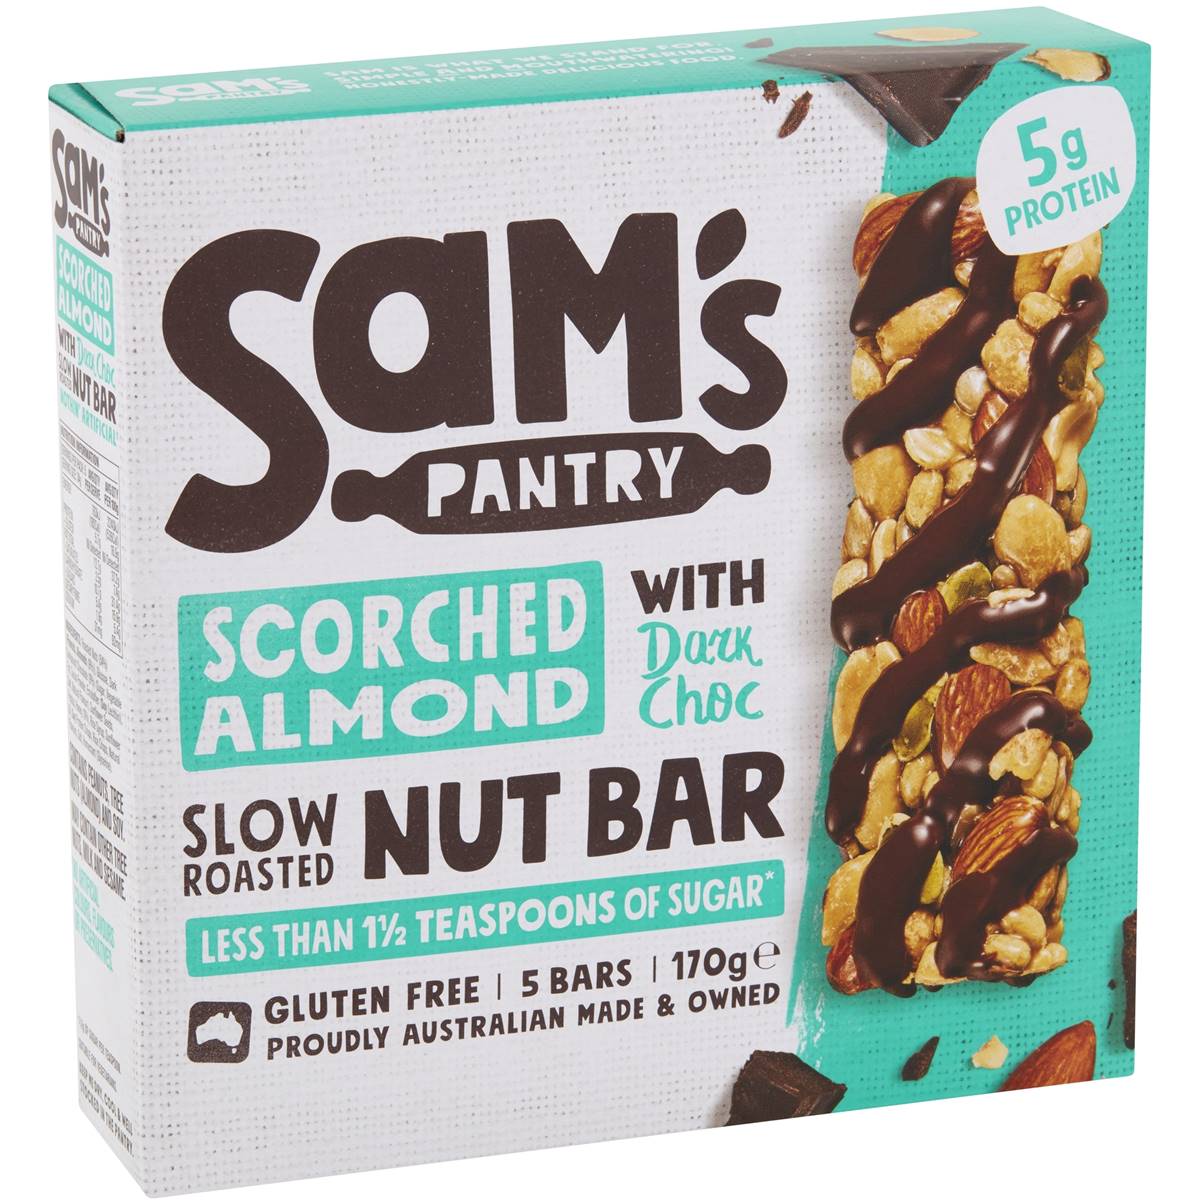 Calories in Sam's Pantry Scorched Almond Nut Bar